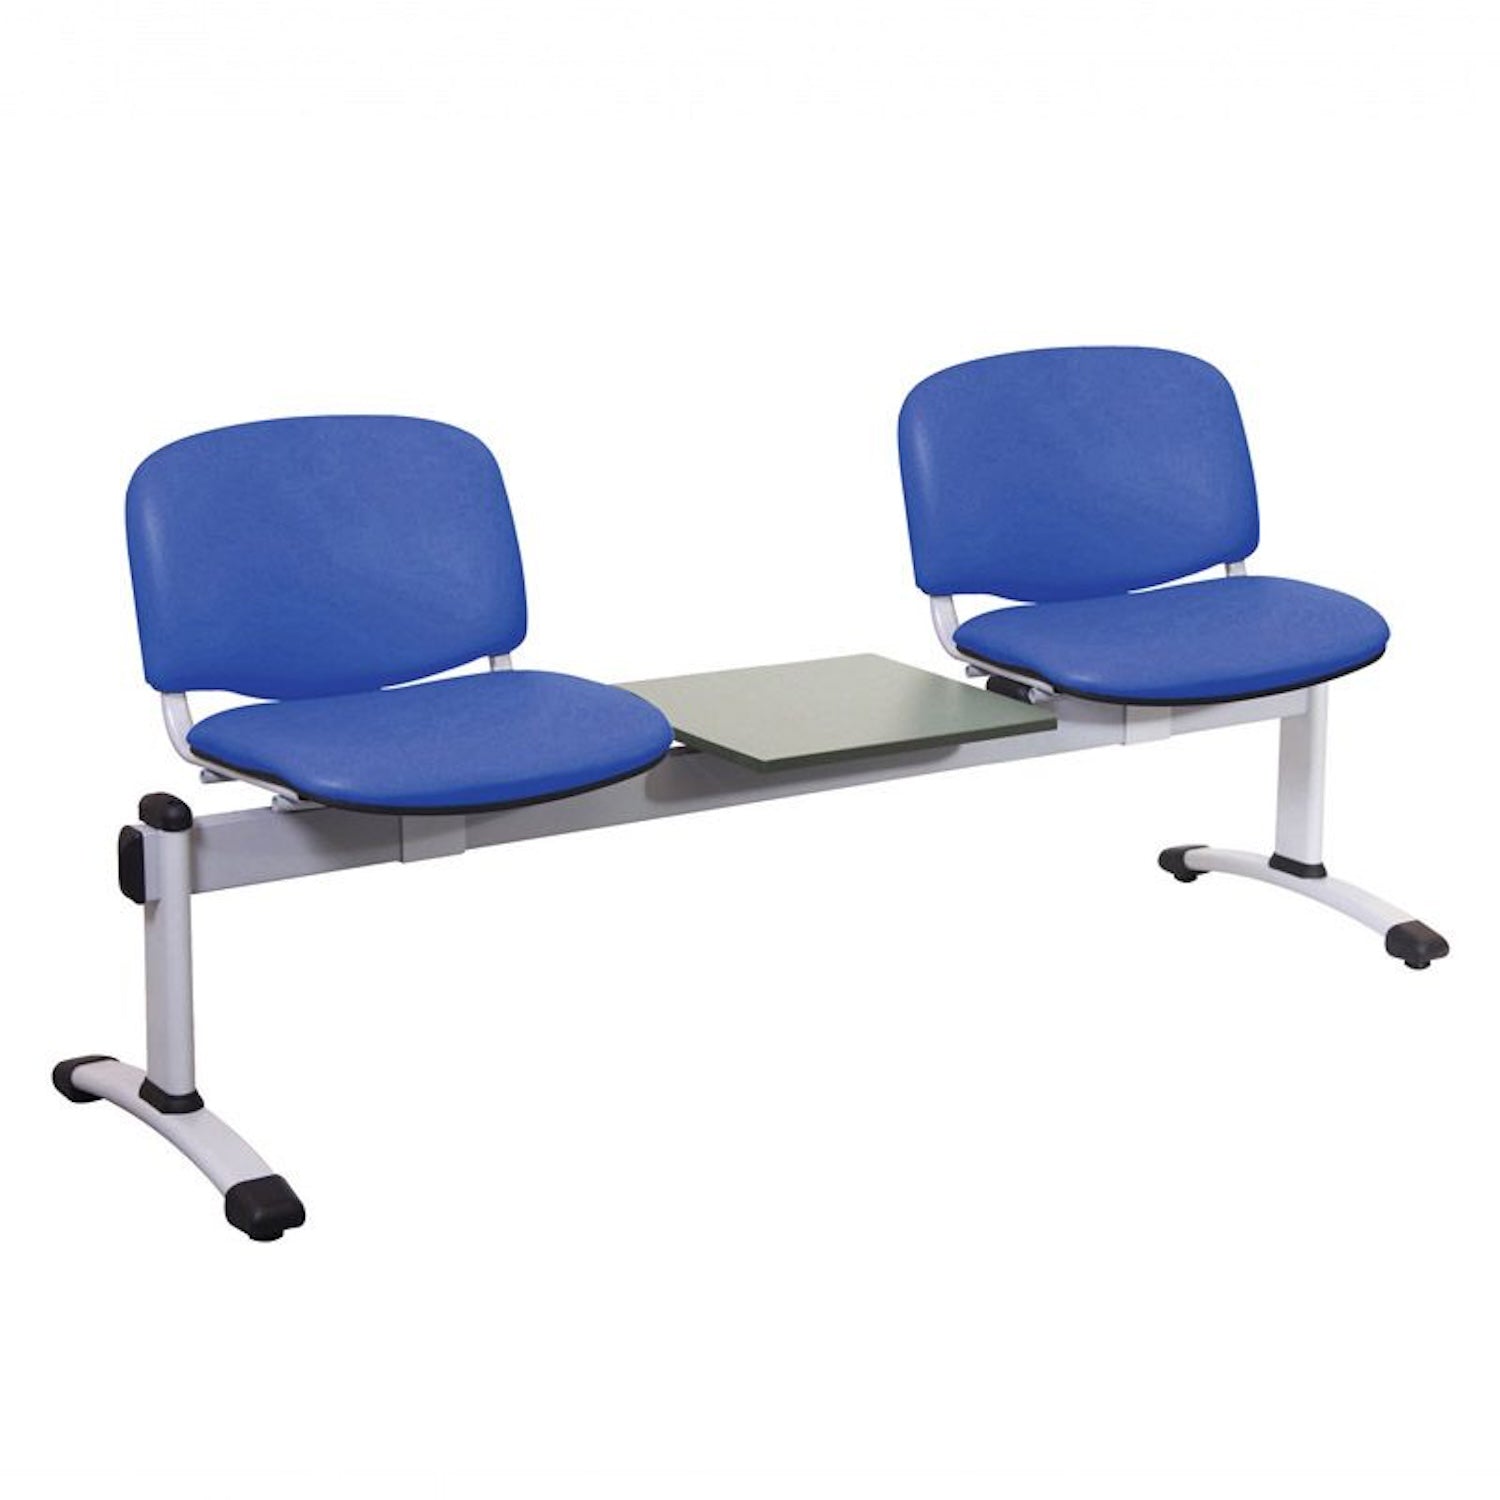 Sunflower Visitor 2 Anti-bacterial Vinyl Upholstery Seats & 1 Table Module in Mid Blue